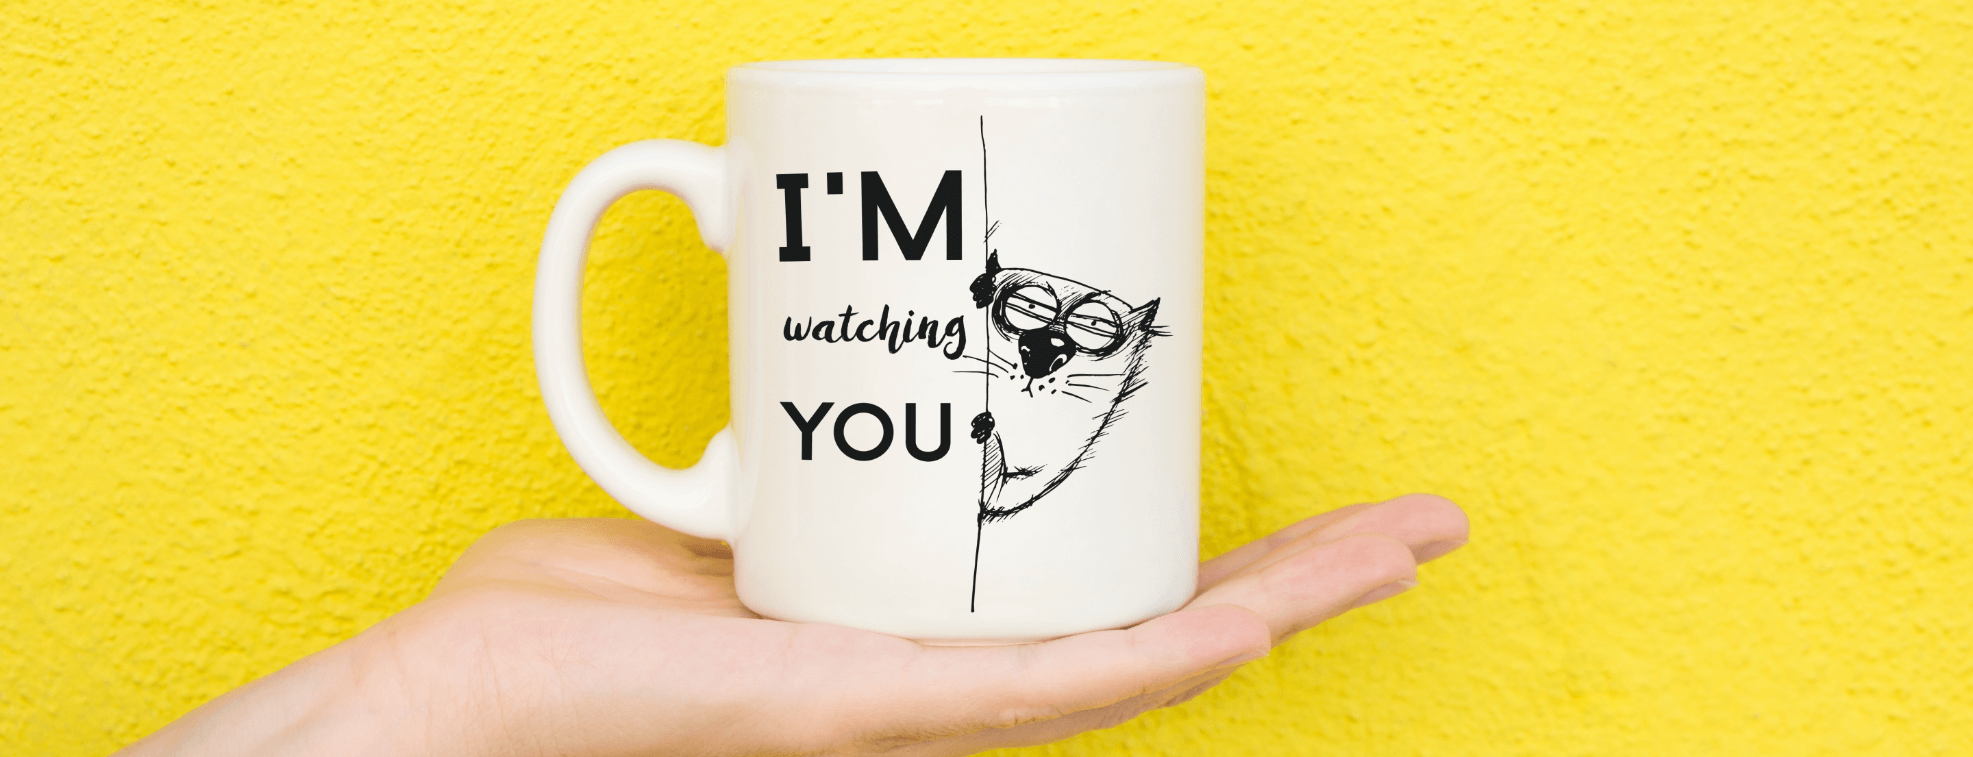 A funny mug on a yellow background with a cat watching you